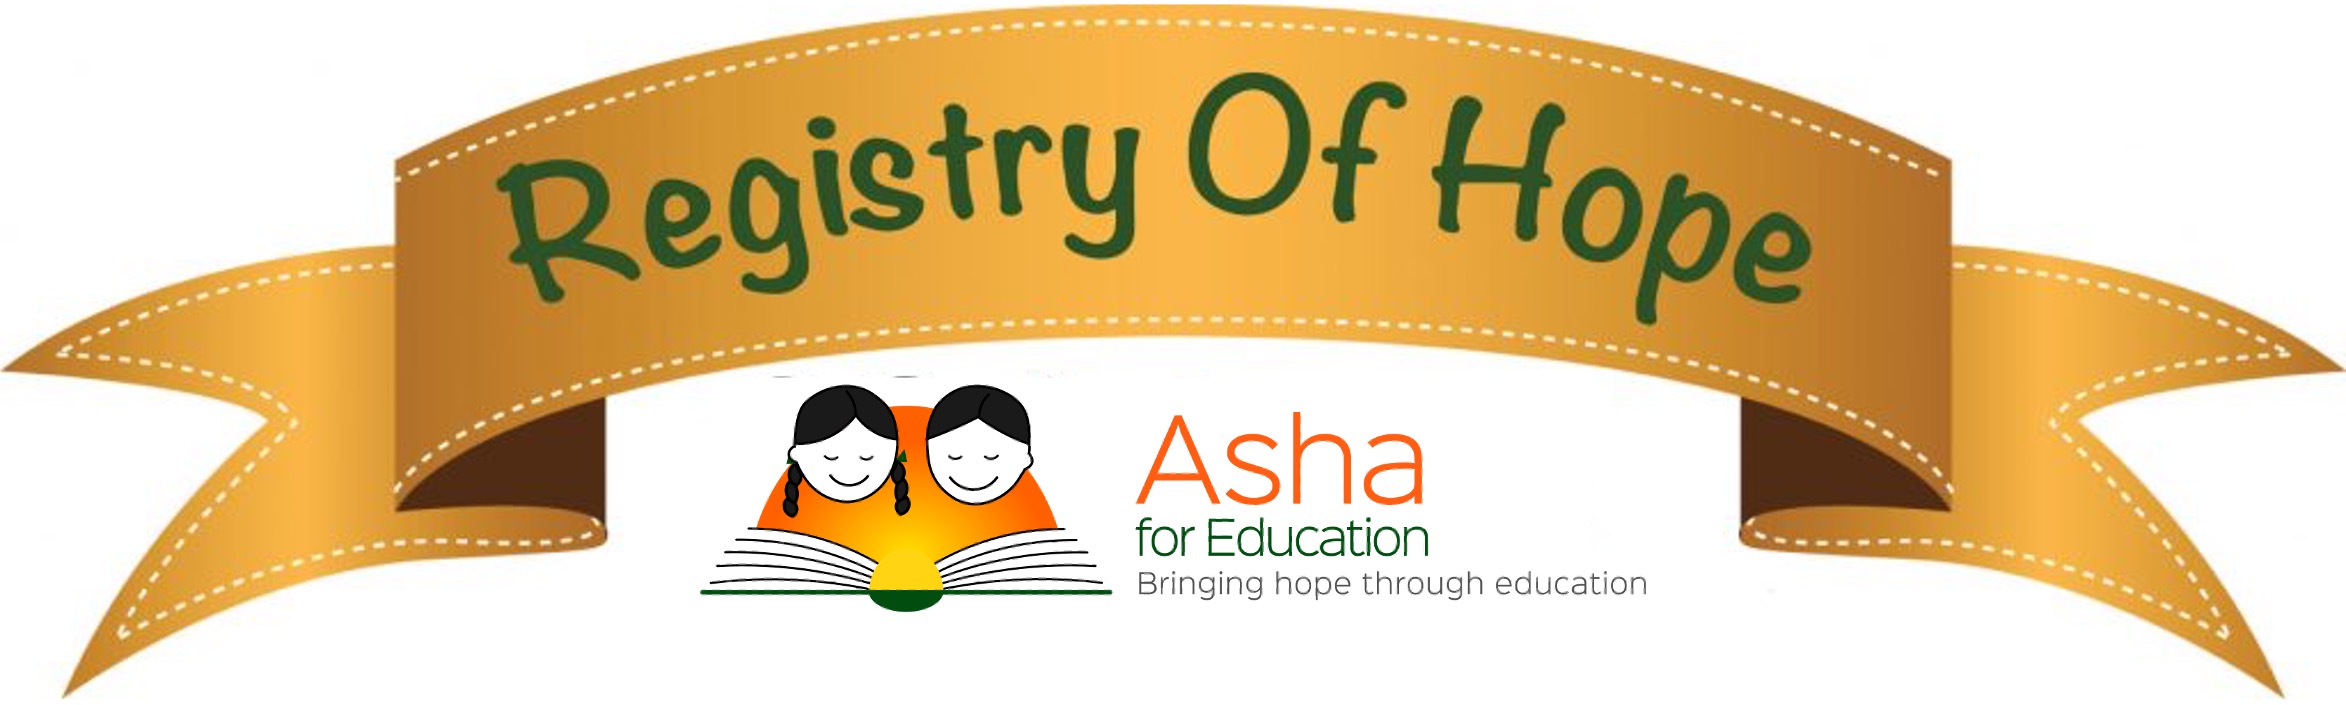 The Registry benefitting Asha for Education